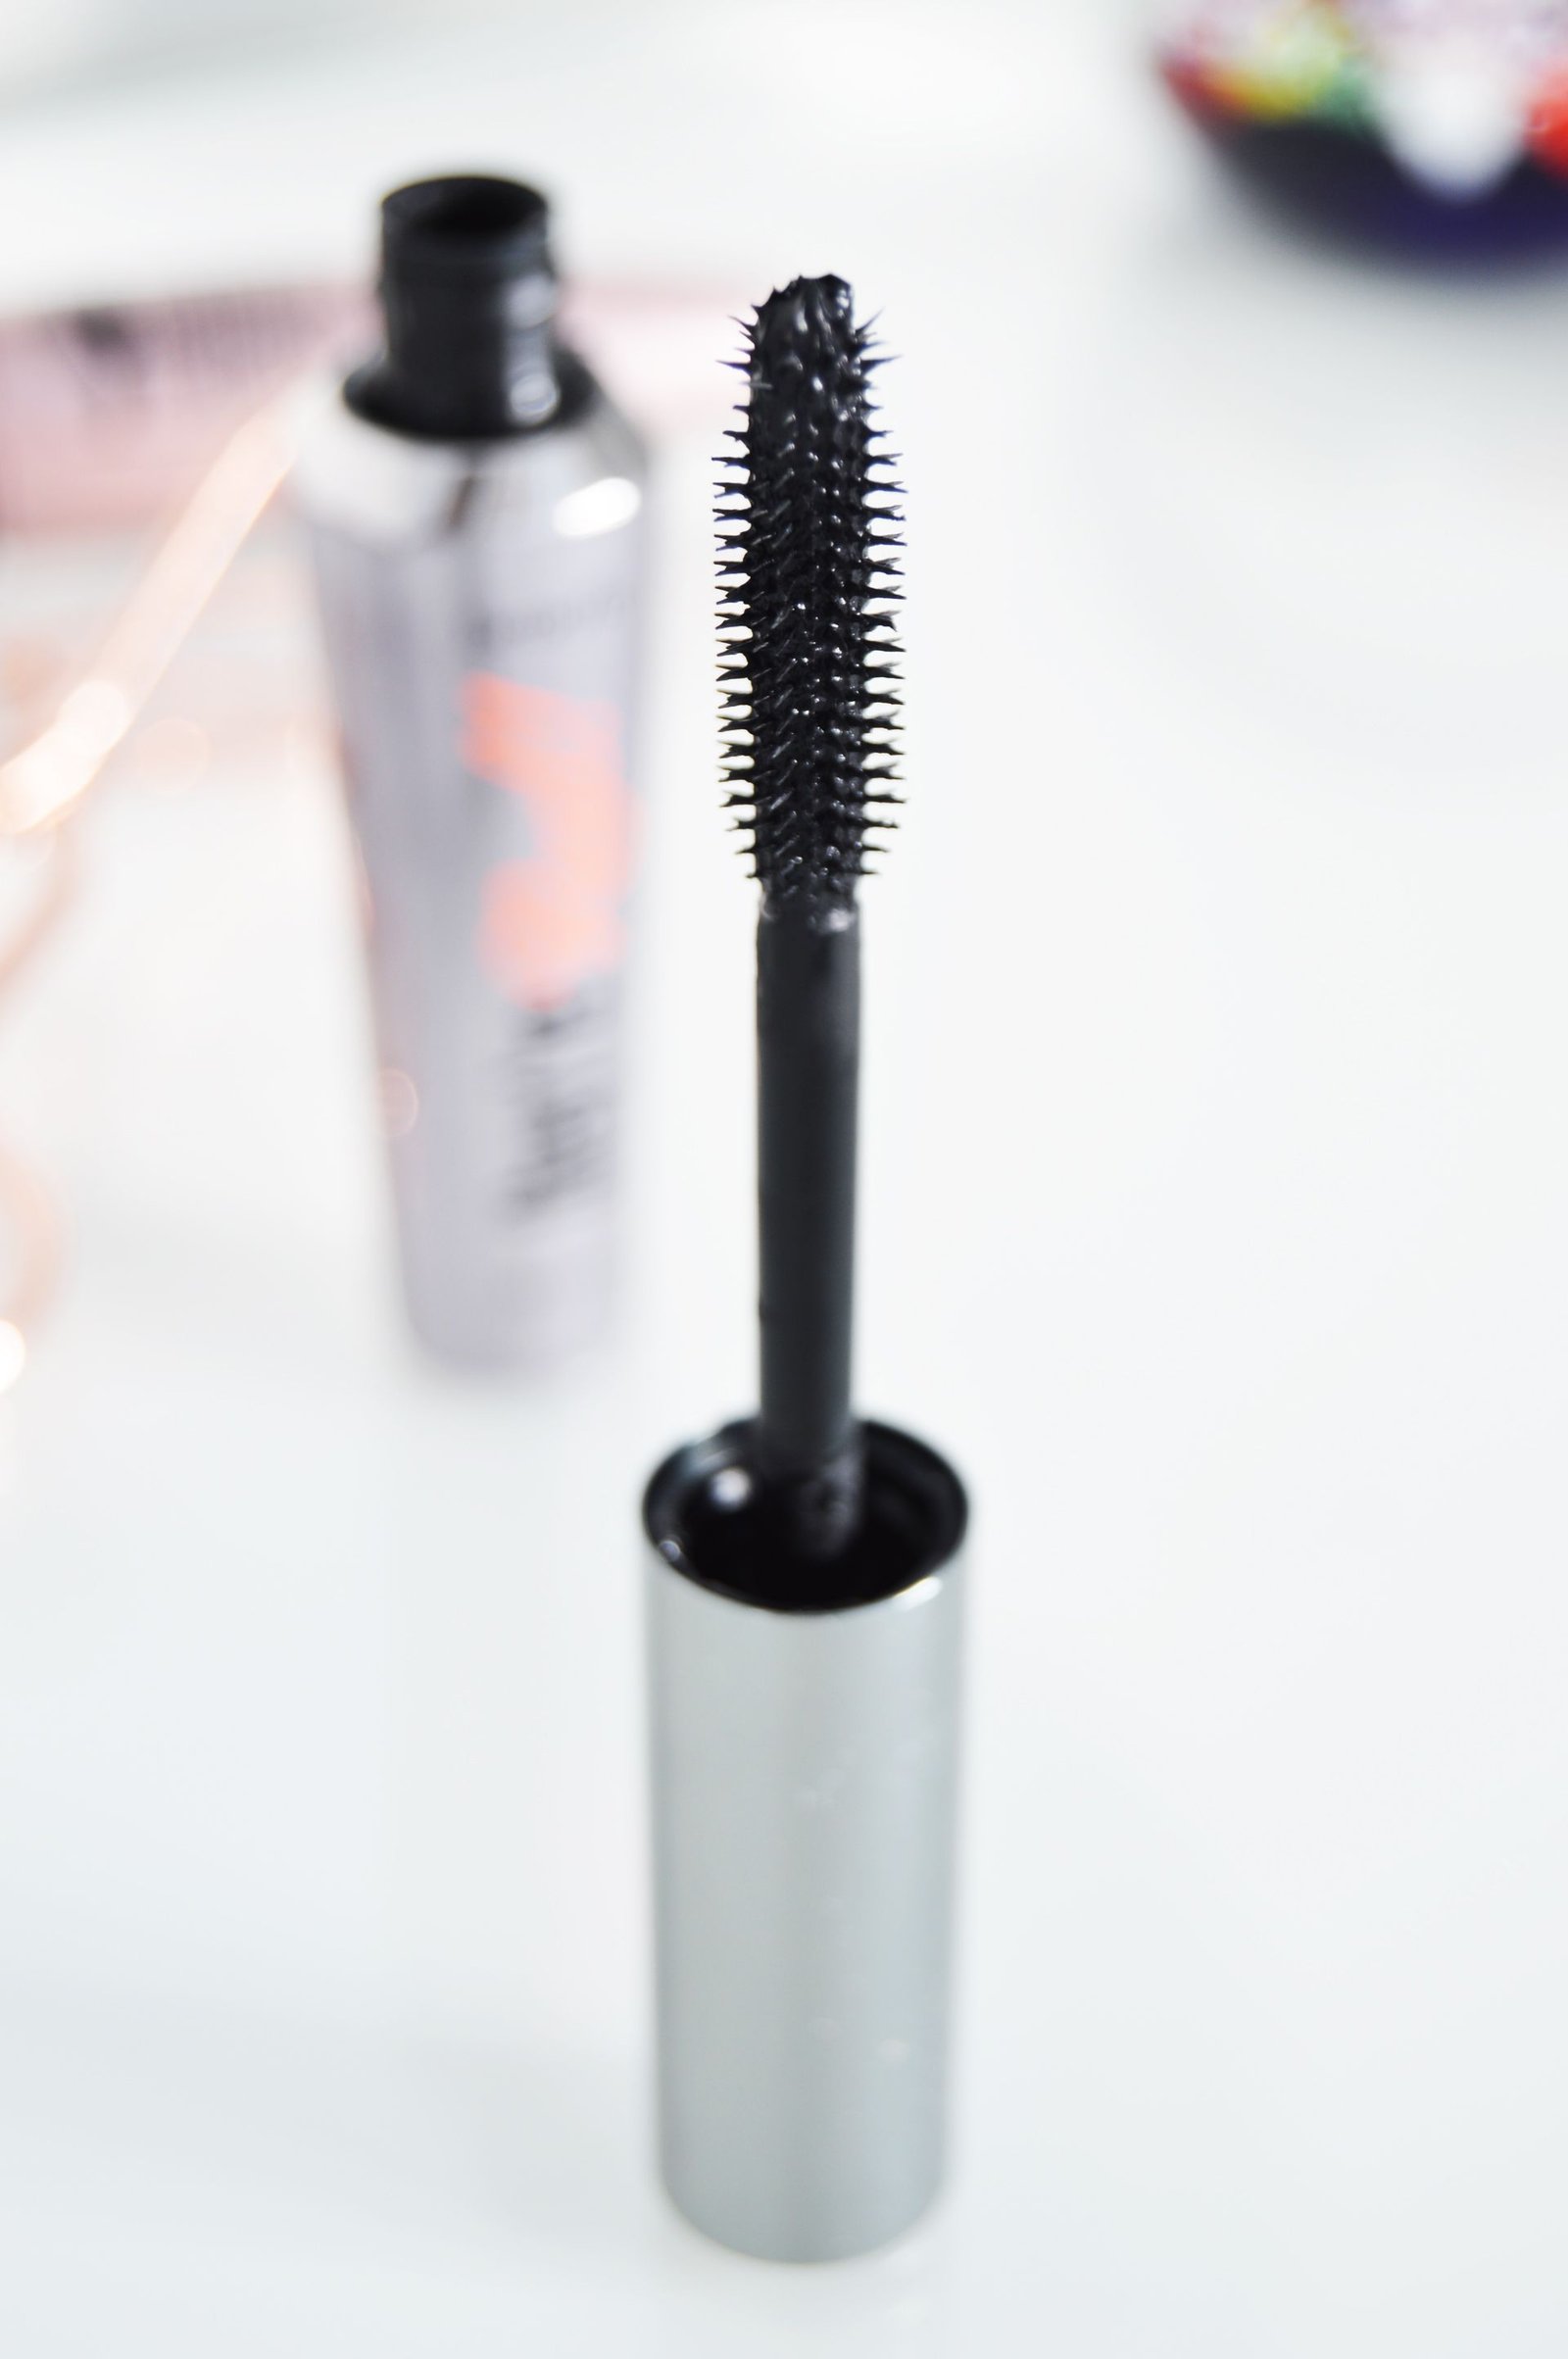 Benefit They're Real mascara claims to lengthen, volumise, curl and lift your lashes.